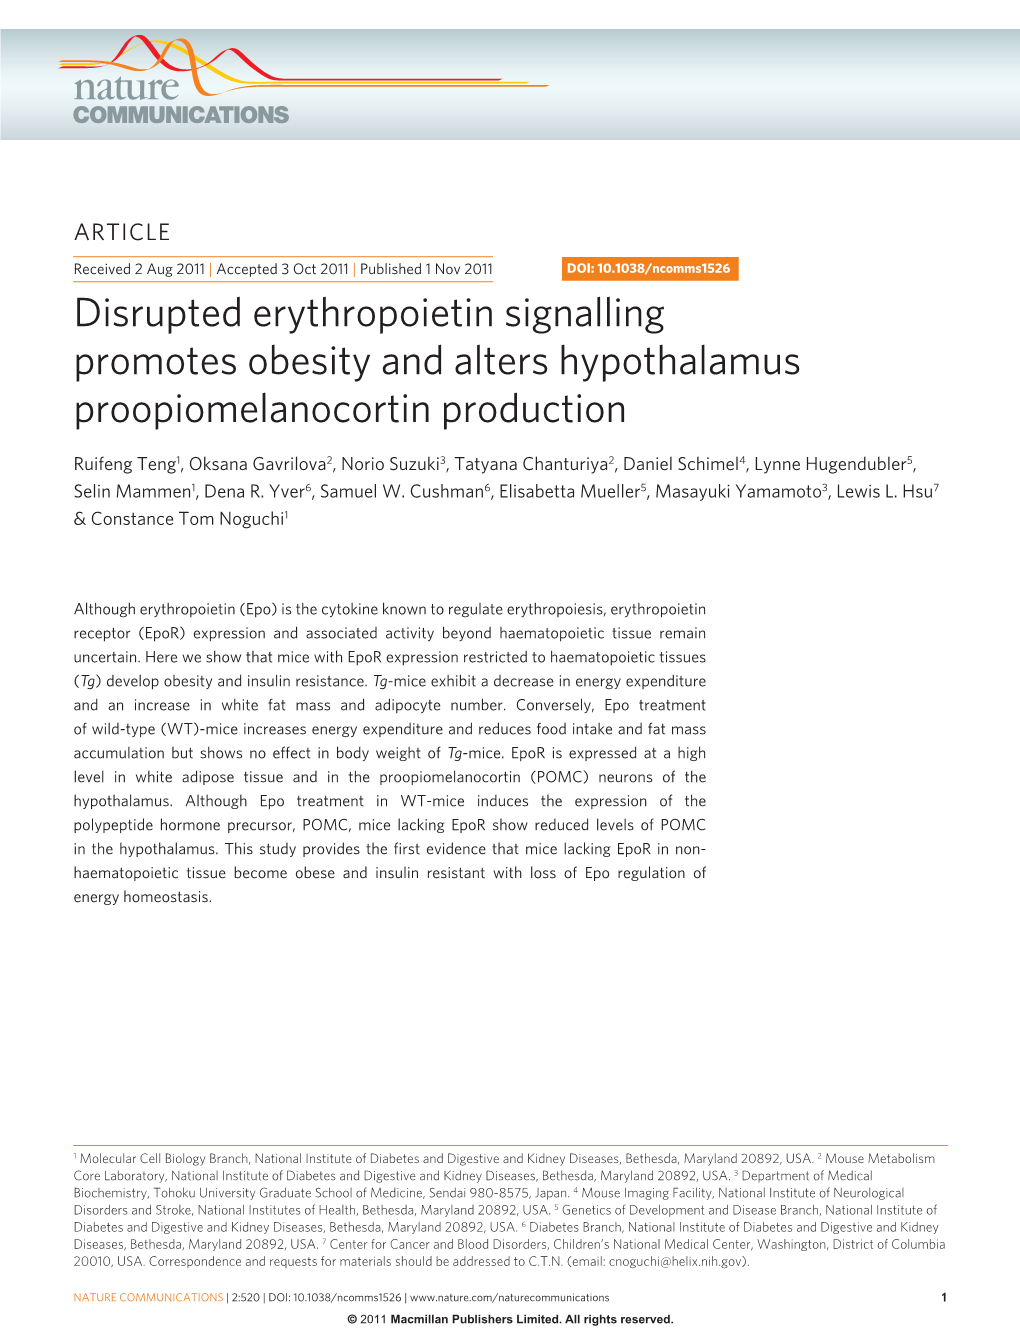 Disrupted Erythropoietin Signalling Promotes Obesity and Alters Hypothalamus Proopiomelanocortin Production